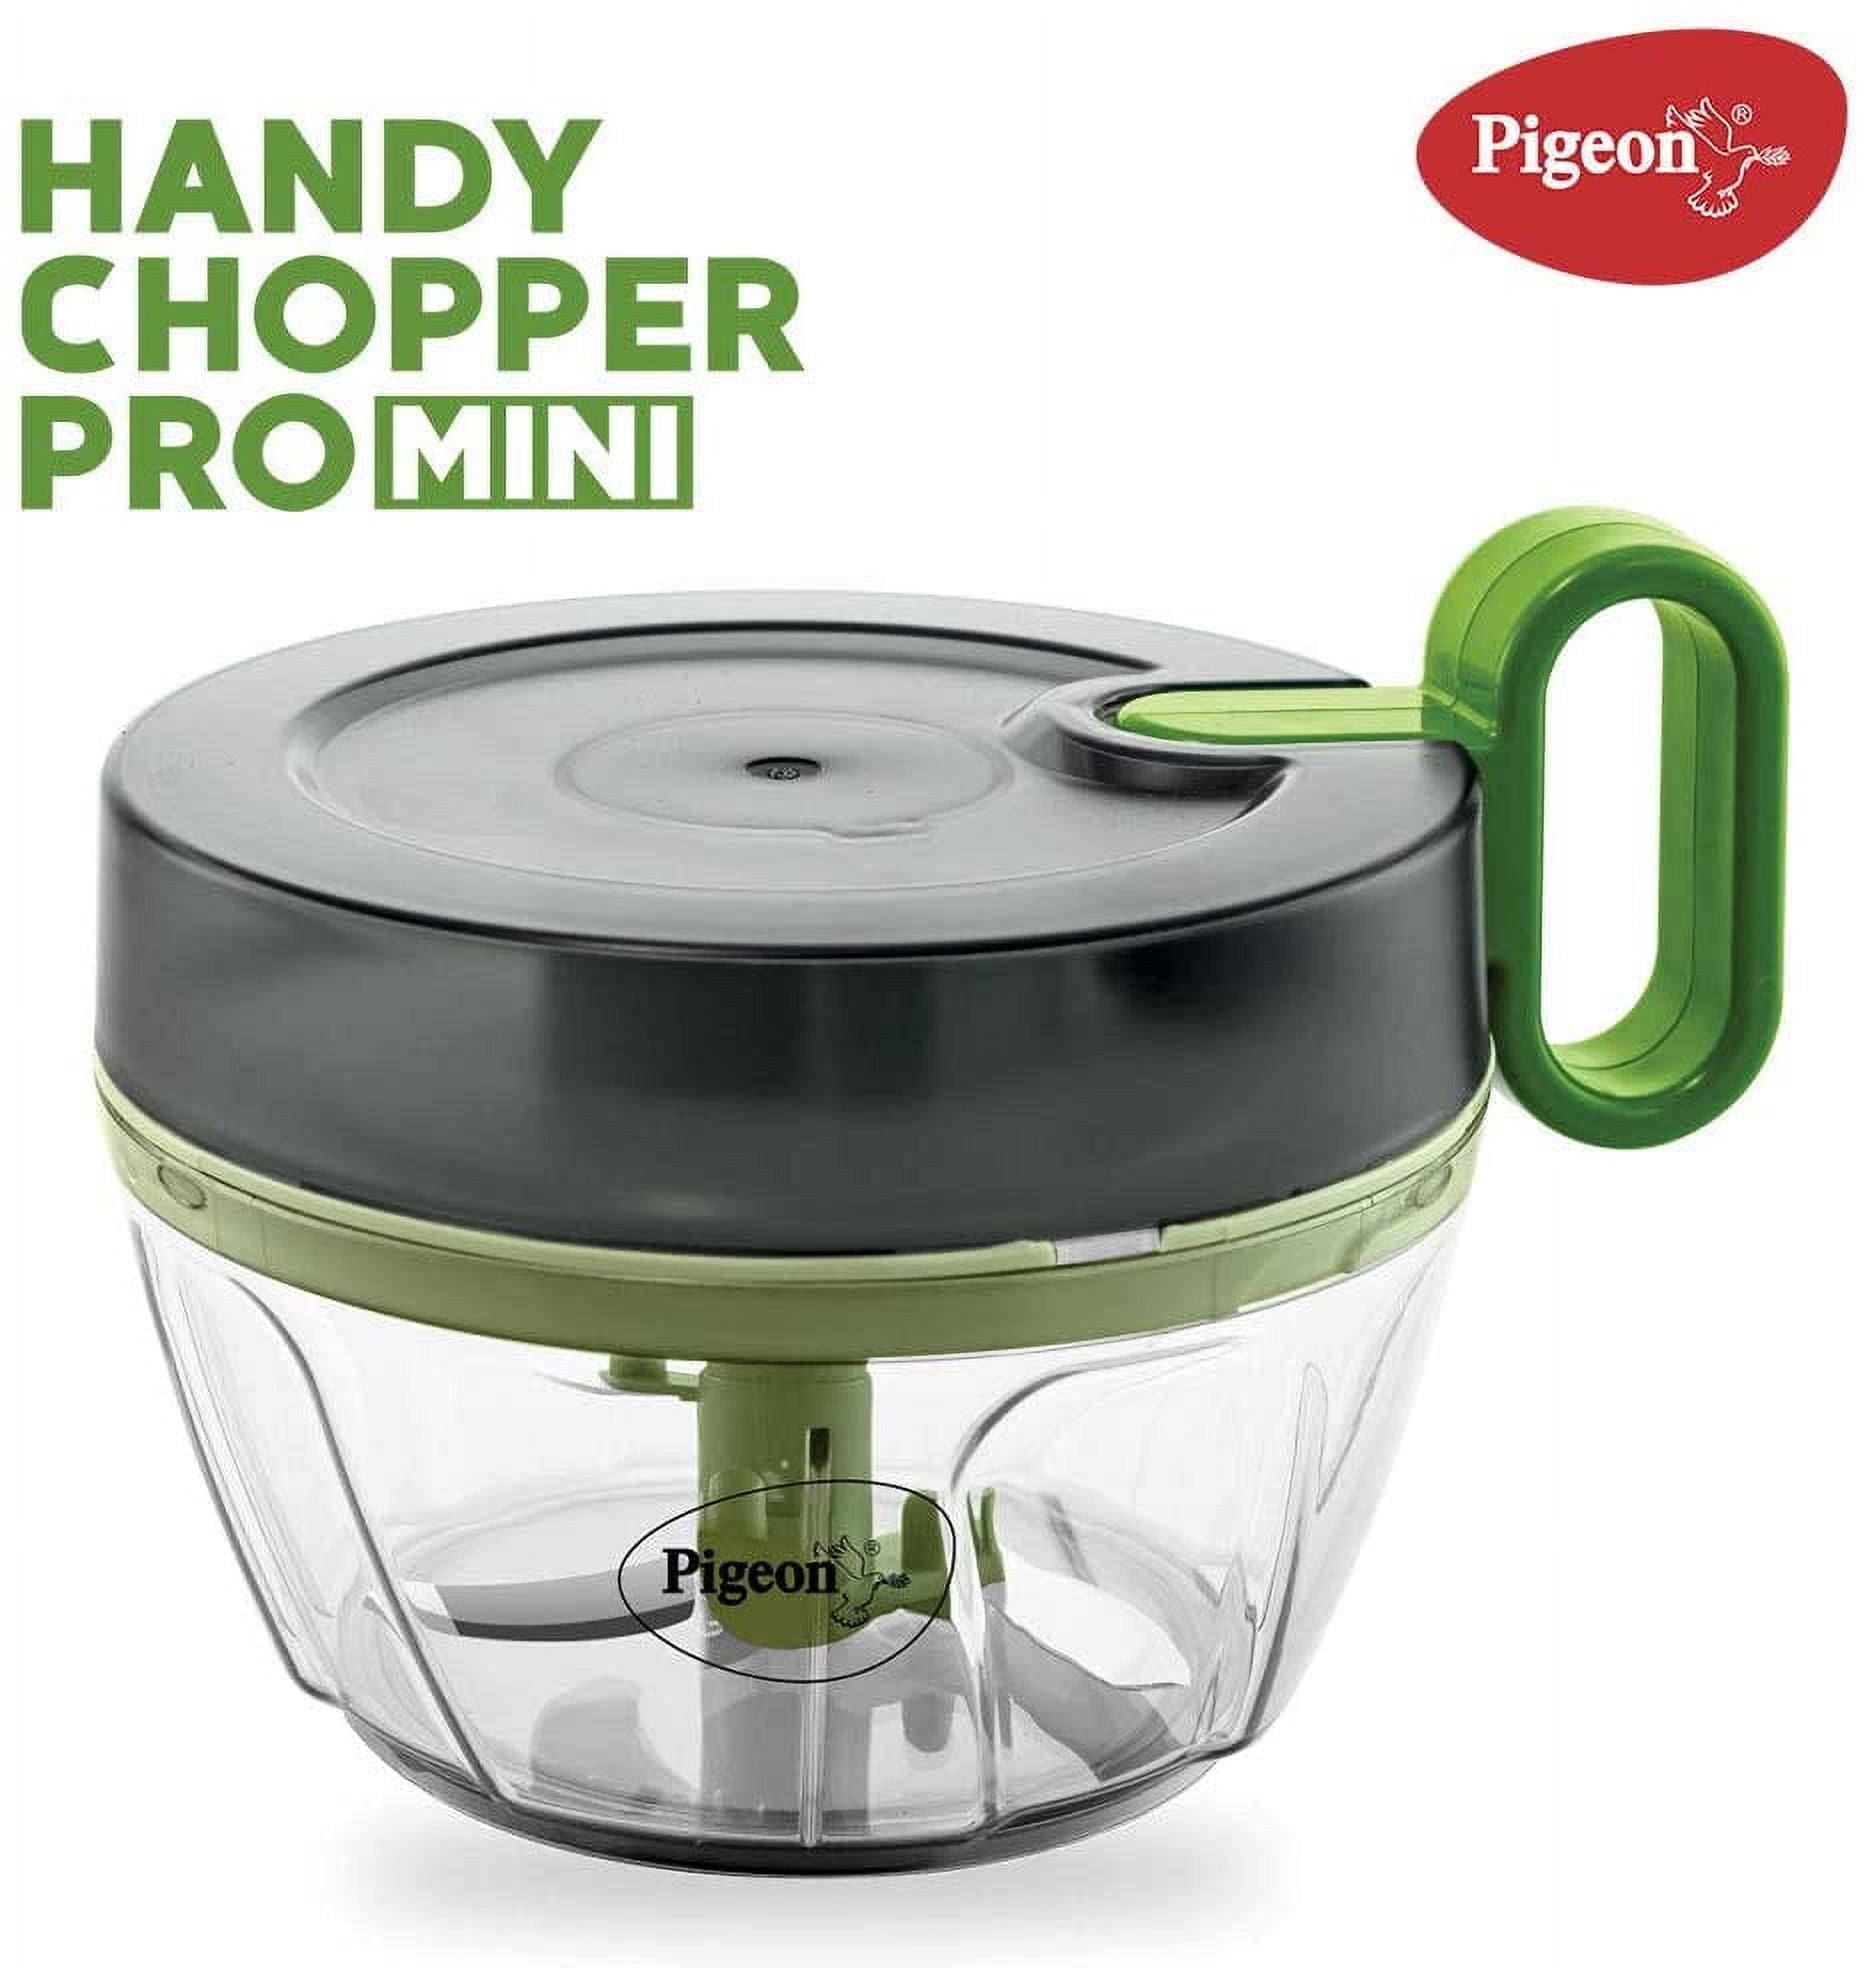 Pigeon Plastic Handy &Compact Chopper To Chop Vegetables (1Pc,Green Color)